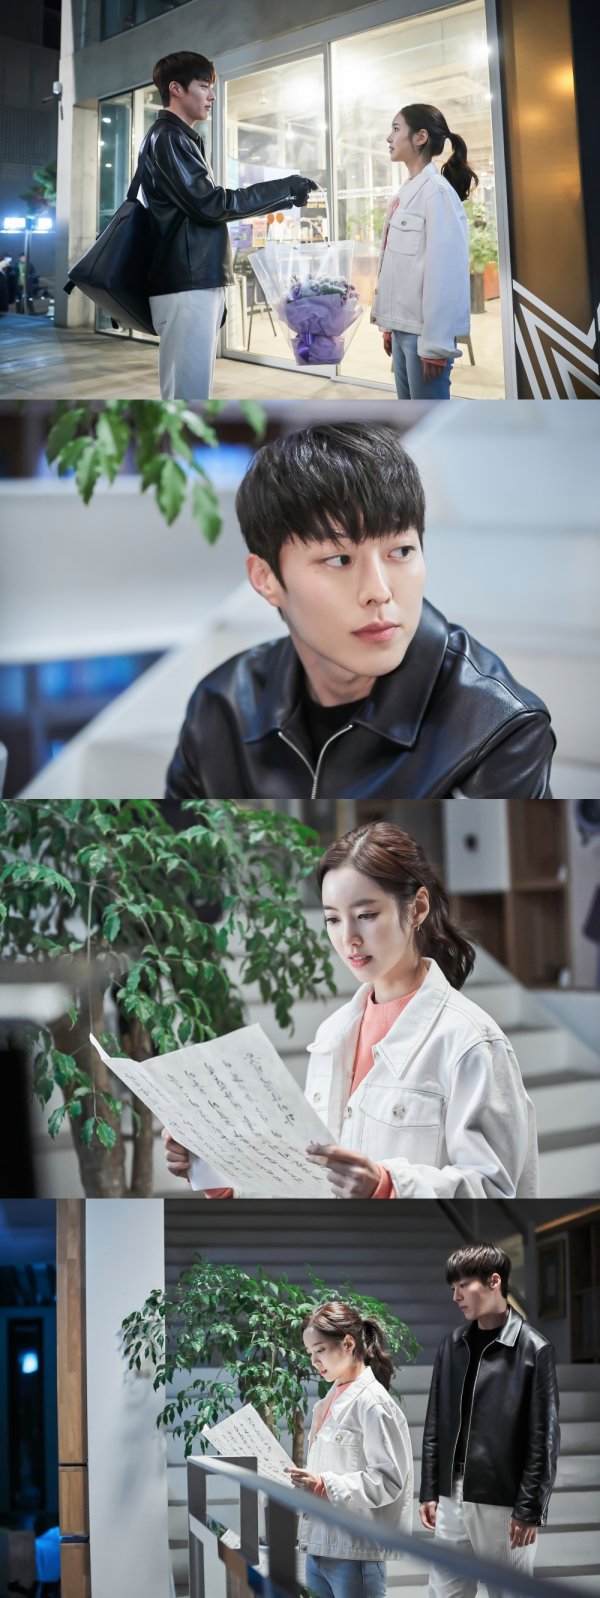 A romantic aura was detected between KBS2 monthly drama Born Again Jang Ki-yong and Jin Se-yeon.In the play Bon Again (playplayplay by Jung Su-mi/directed by Jin Hyung-wook and Lee Hyun-seok), the showroom date scene of Chun Jong-beom and Jung Se-yeon is caught and drawing attention.Yesterday (27th) broadcast depicted the reincarnation of the present, with the relationship between three men and women living in the 1980s ending in a terrible tragedy.The reunion of Chun Jong-beom (Jang Ki-yong), Jung Se-yeon and Kim Soo-hyuk (Lee Soo-hyuk) who were not able to recognize each other but were strongly attracted to each other gave a thrill.Especially, Jung Sa-bin, who lectured enthusiastically about bone archaeology at school, and the sparkling chemistry of Chun Jong-bum, a student who added her objections to her class, added excitement.In addition, after the class, the index of excitement was amplified in the manner of Chun Jong Bum who handed the head strap to Jeong Sabin.Today (28th) broadcasts are also expected to bomb the womans feelings again with the subtle atmosphere of Chun Jong-beom and Jeong Sa-bin.In the public photos, Chun Jong-bum, who hands a bouquet of flowers, and Jeong Sa-bins expression, I feel the smell of a sweet Thumb that is hard to see as a regular priest.The Date scenery of Jang Ki-yong and Jin Se-yeon, which are thrilling just by looking at it, can be seen in KBS 2TV monthly drama Bone Again, which is broadcasted at 10 pm today (28th).Photo Offering: UFO Productions, Monster Union